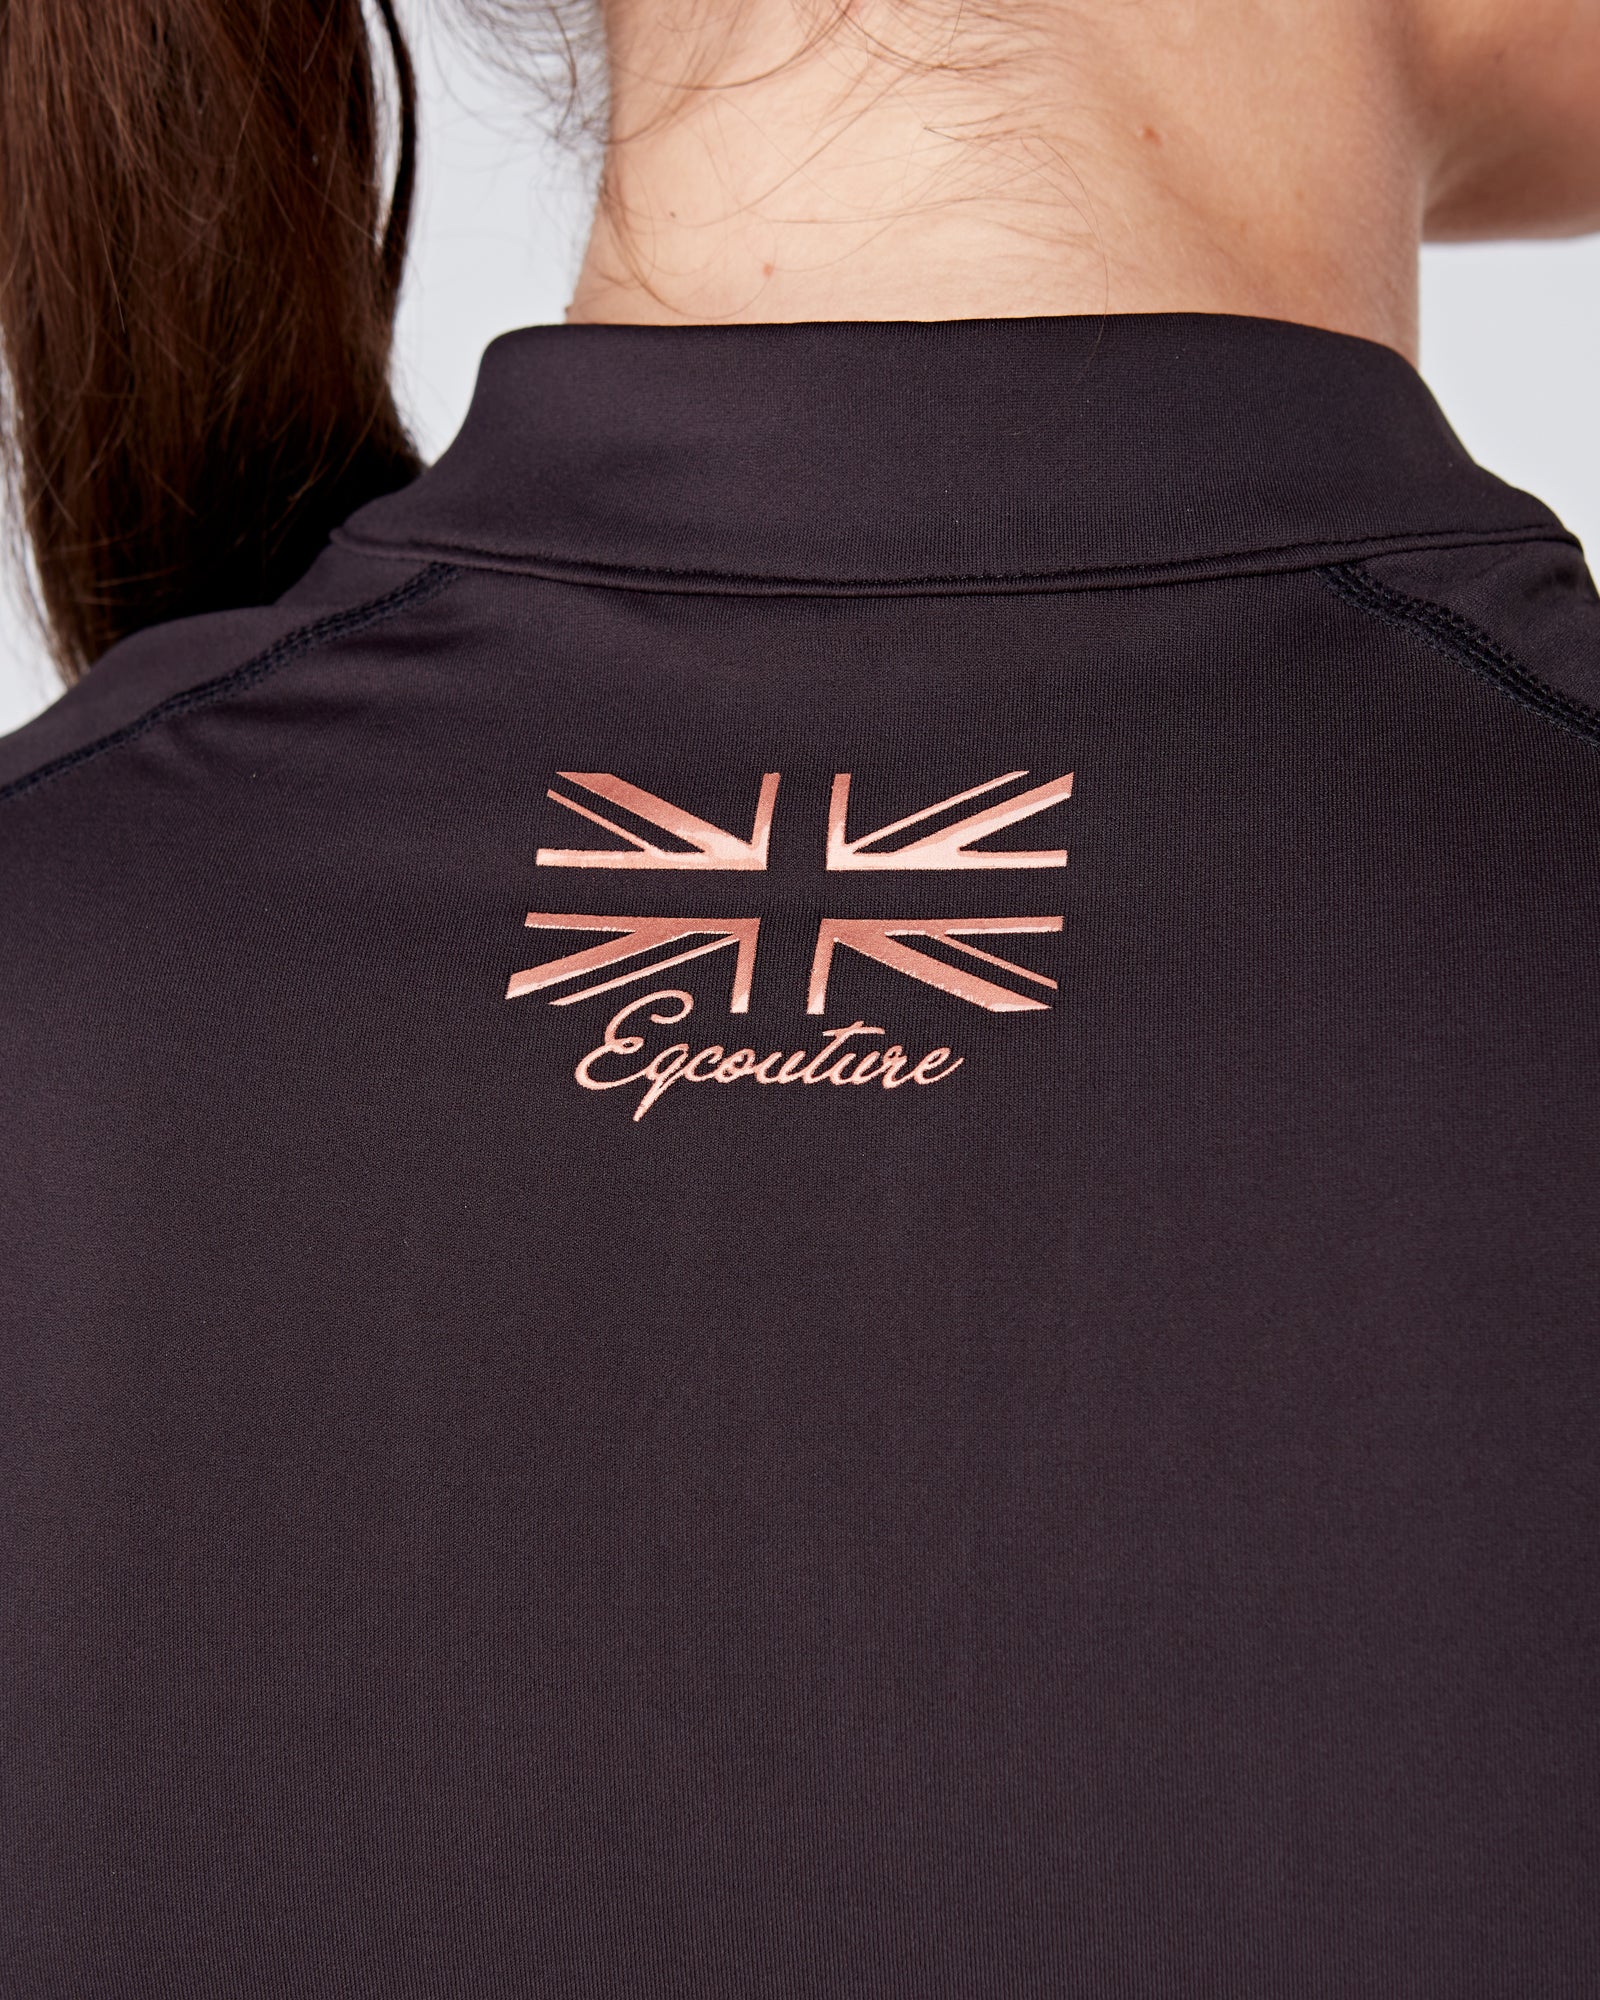 Womens Equestrian long sleeve BLACK/ROSE GOLD riding top / base layer / sports horse riding top- Eqcouture.